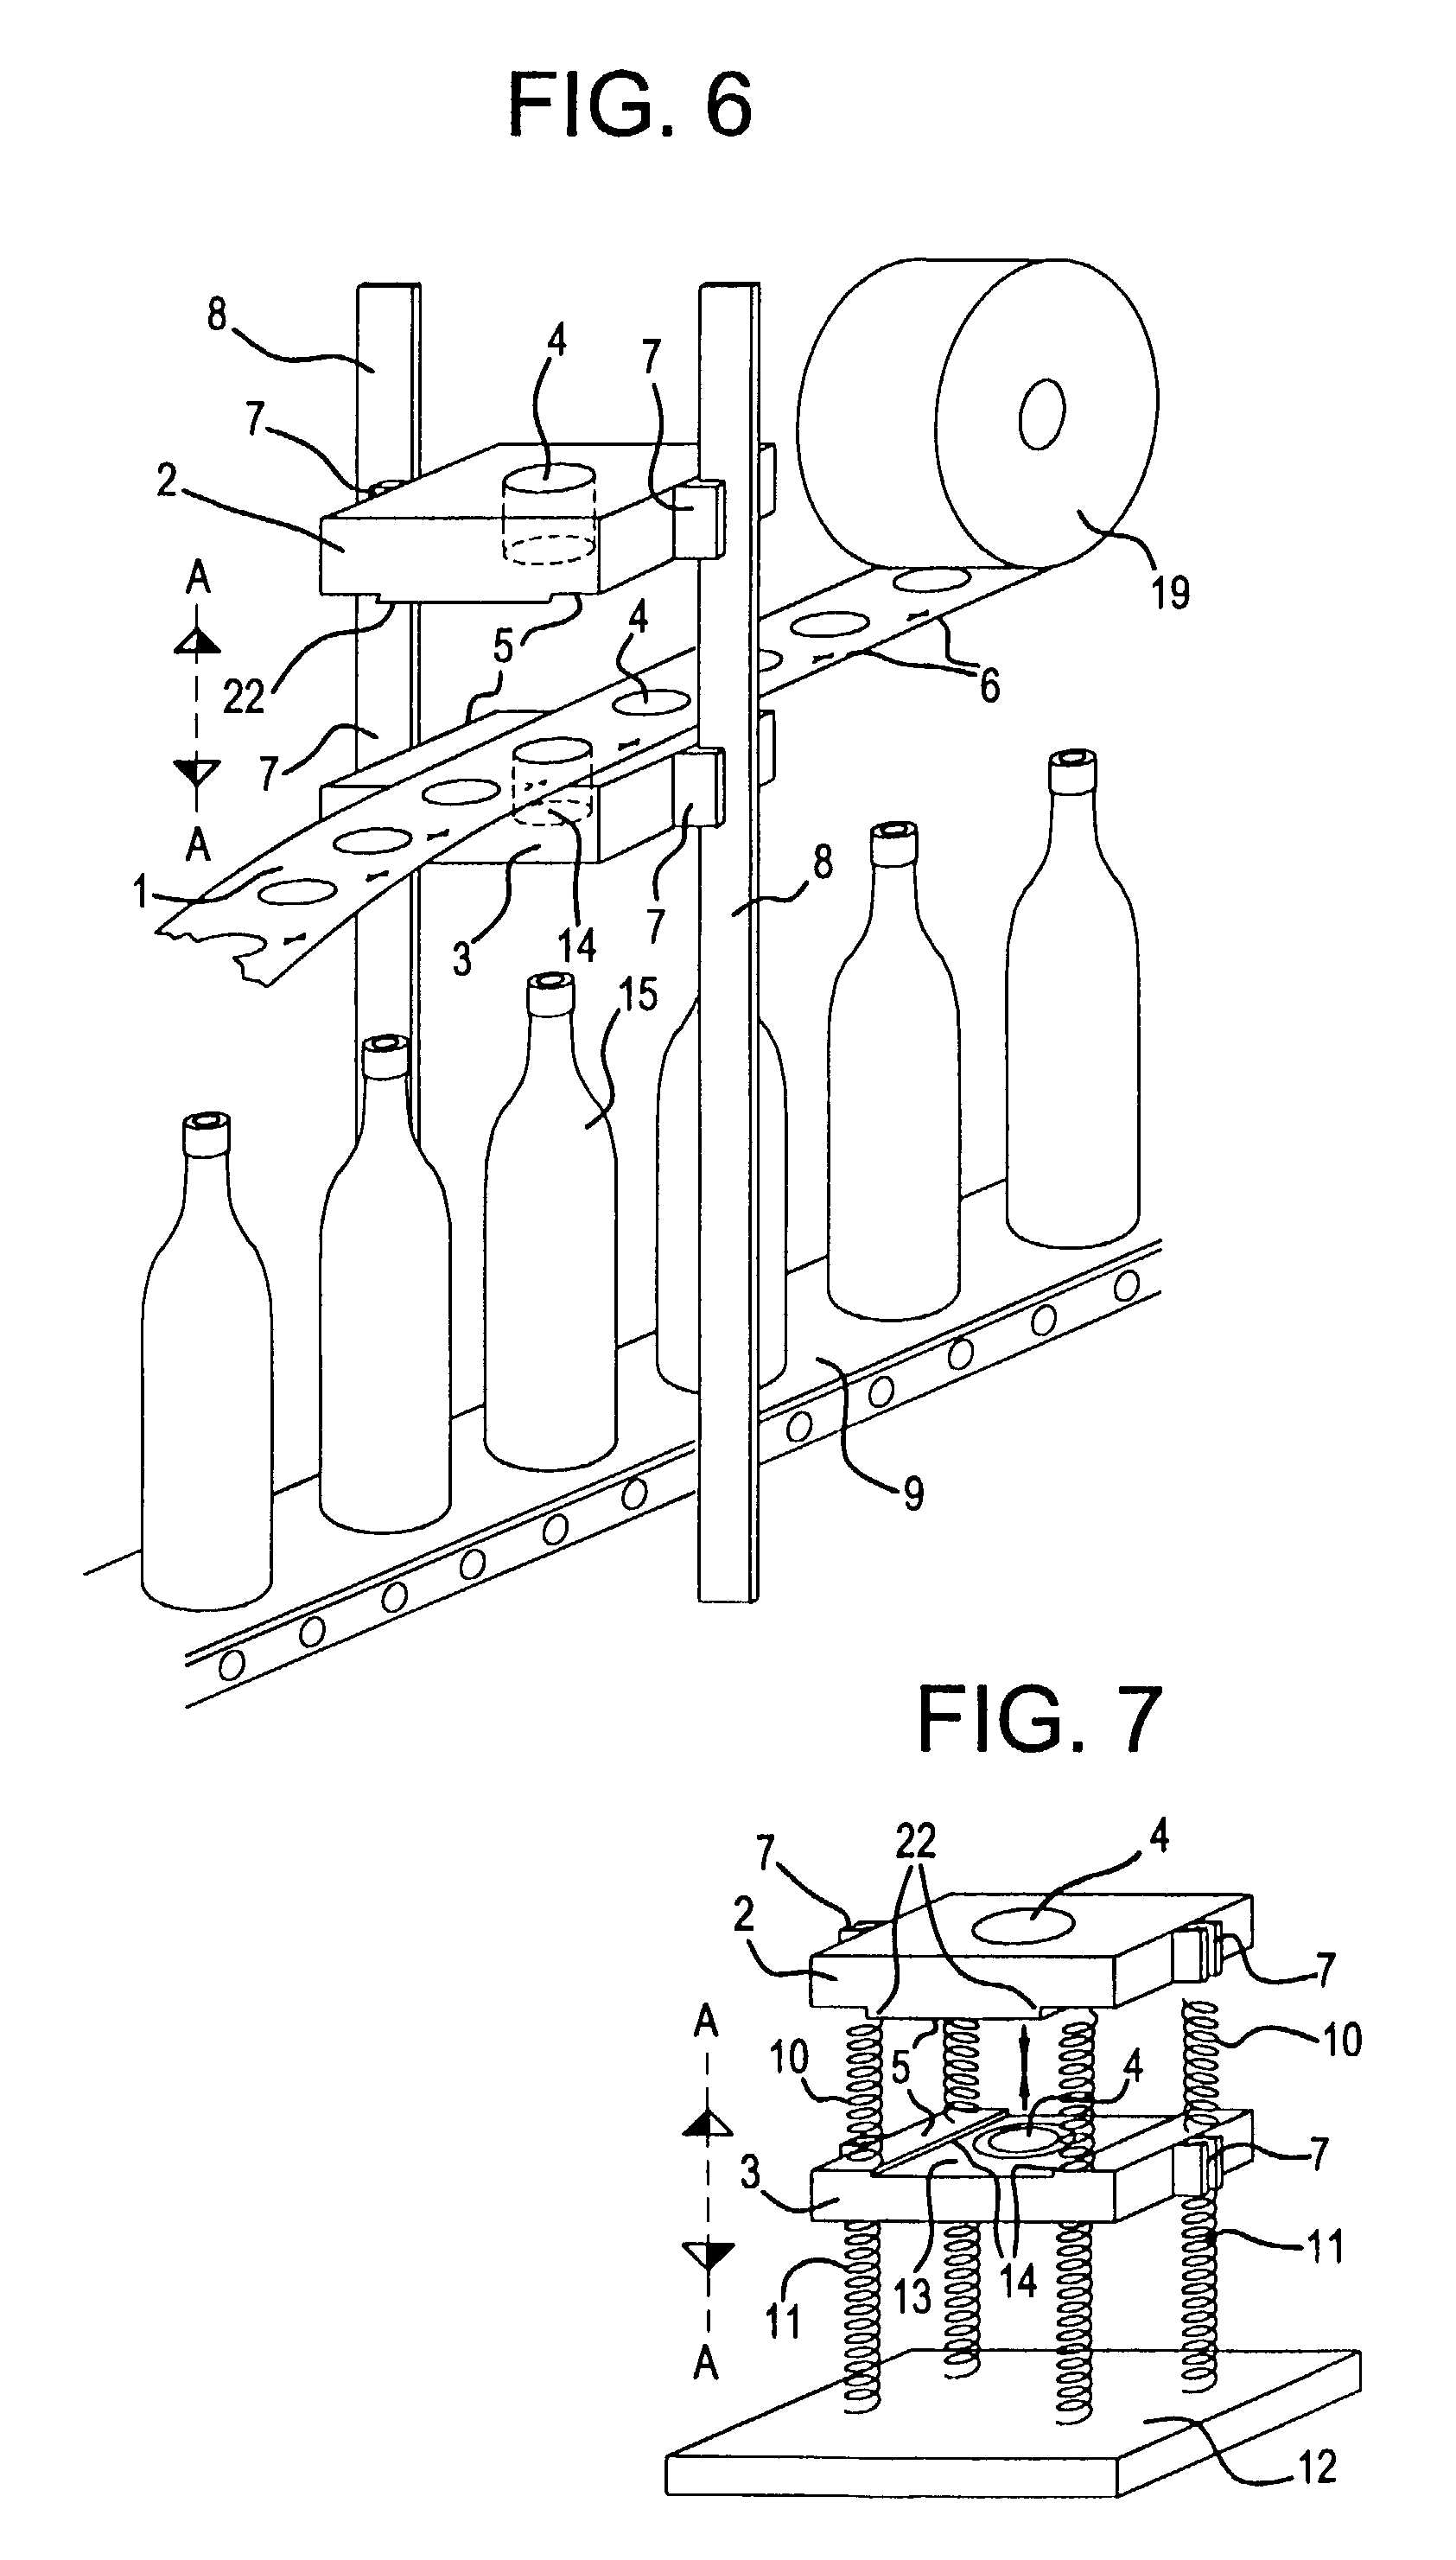 Tape for mass sealing bottles and similar containers, and apparati for its application and removal